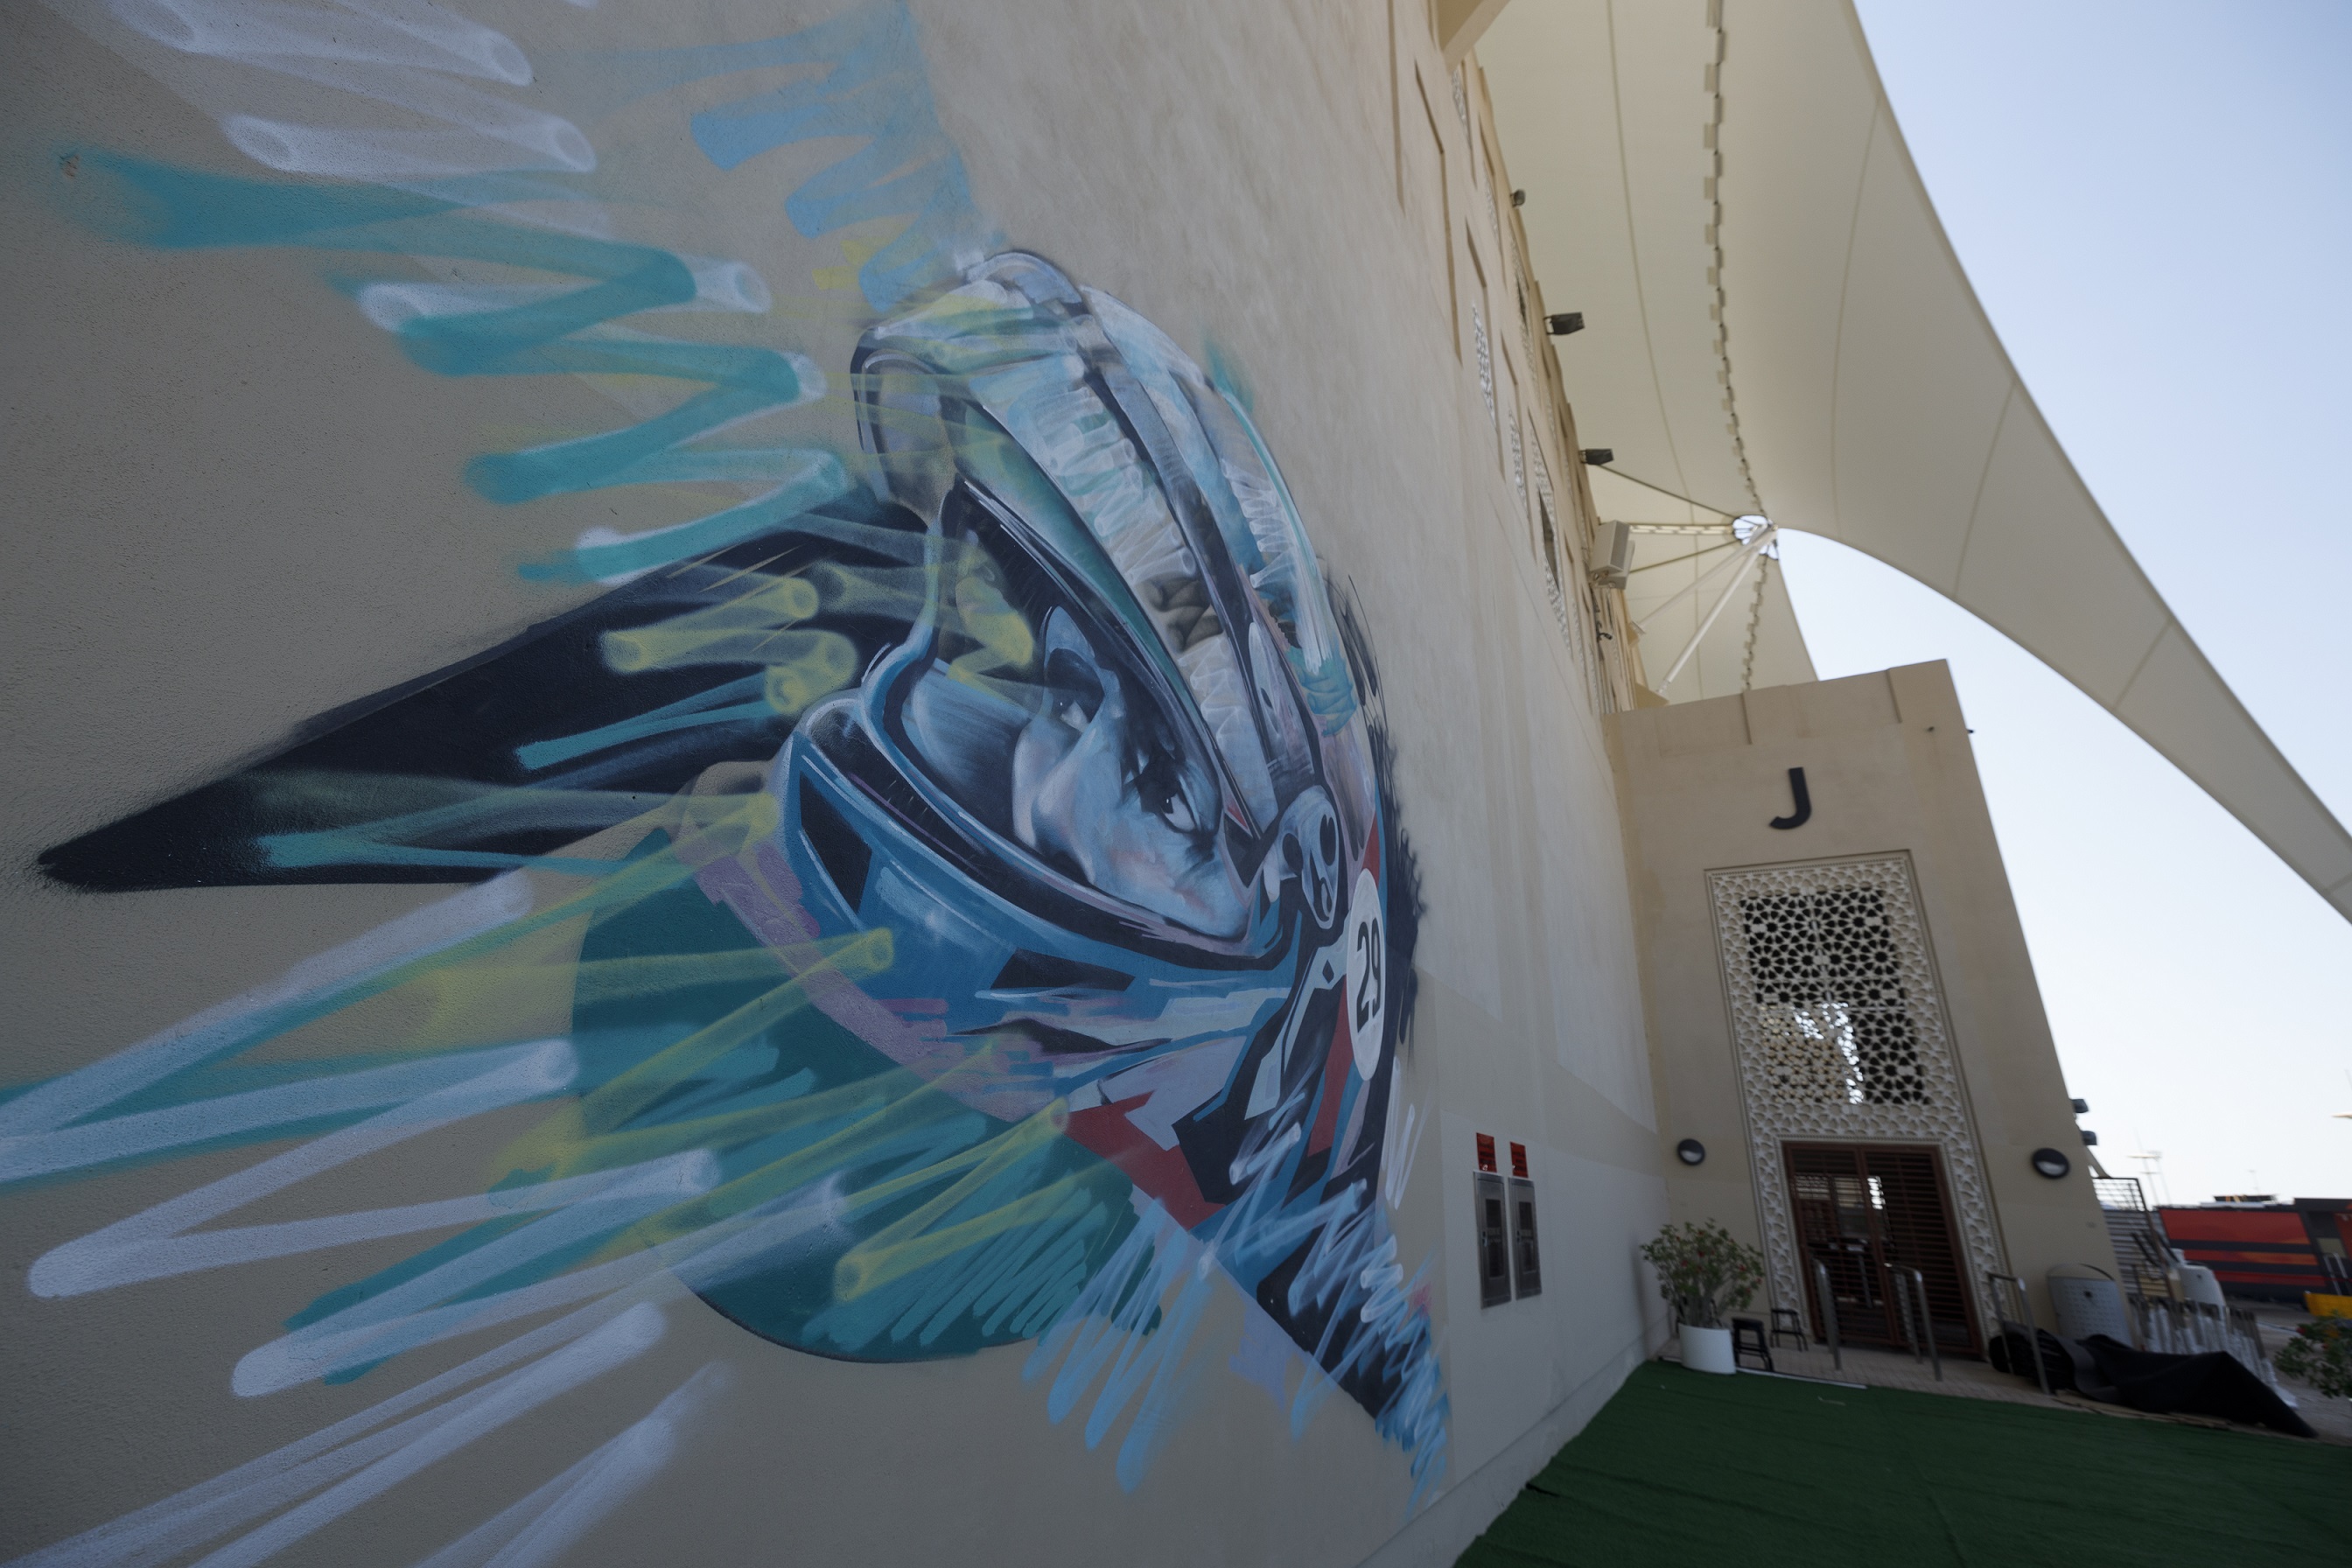 Yas Marina Circuit Celebrate 50 Years Of The UAE With Unique Murals Ahead Of The 2021 Abu Dhabi Grand Prix